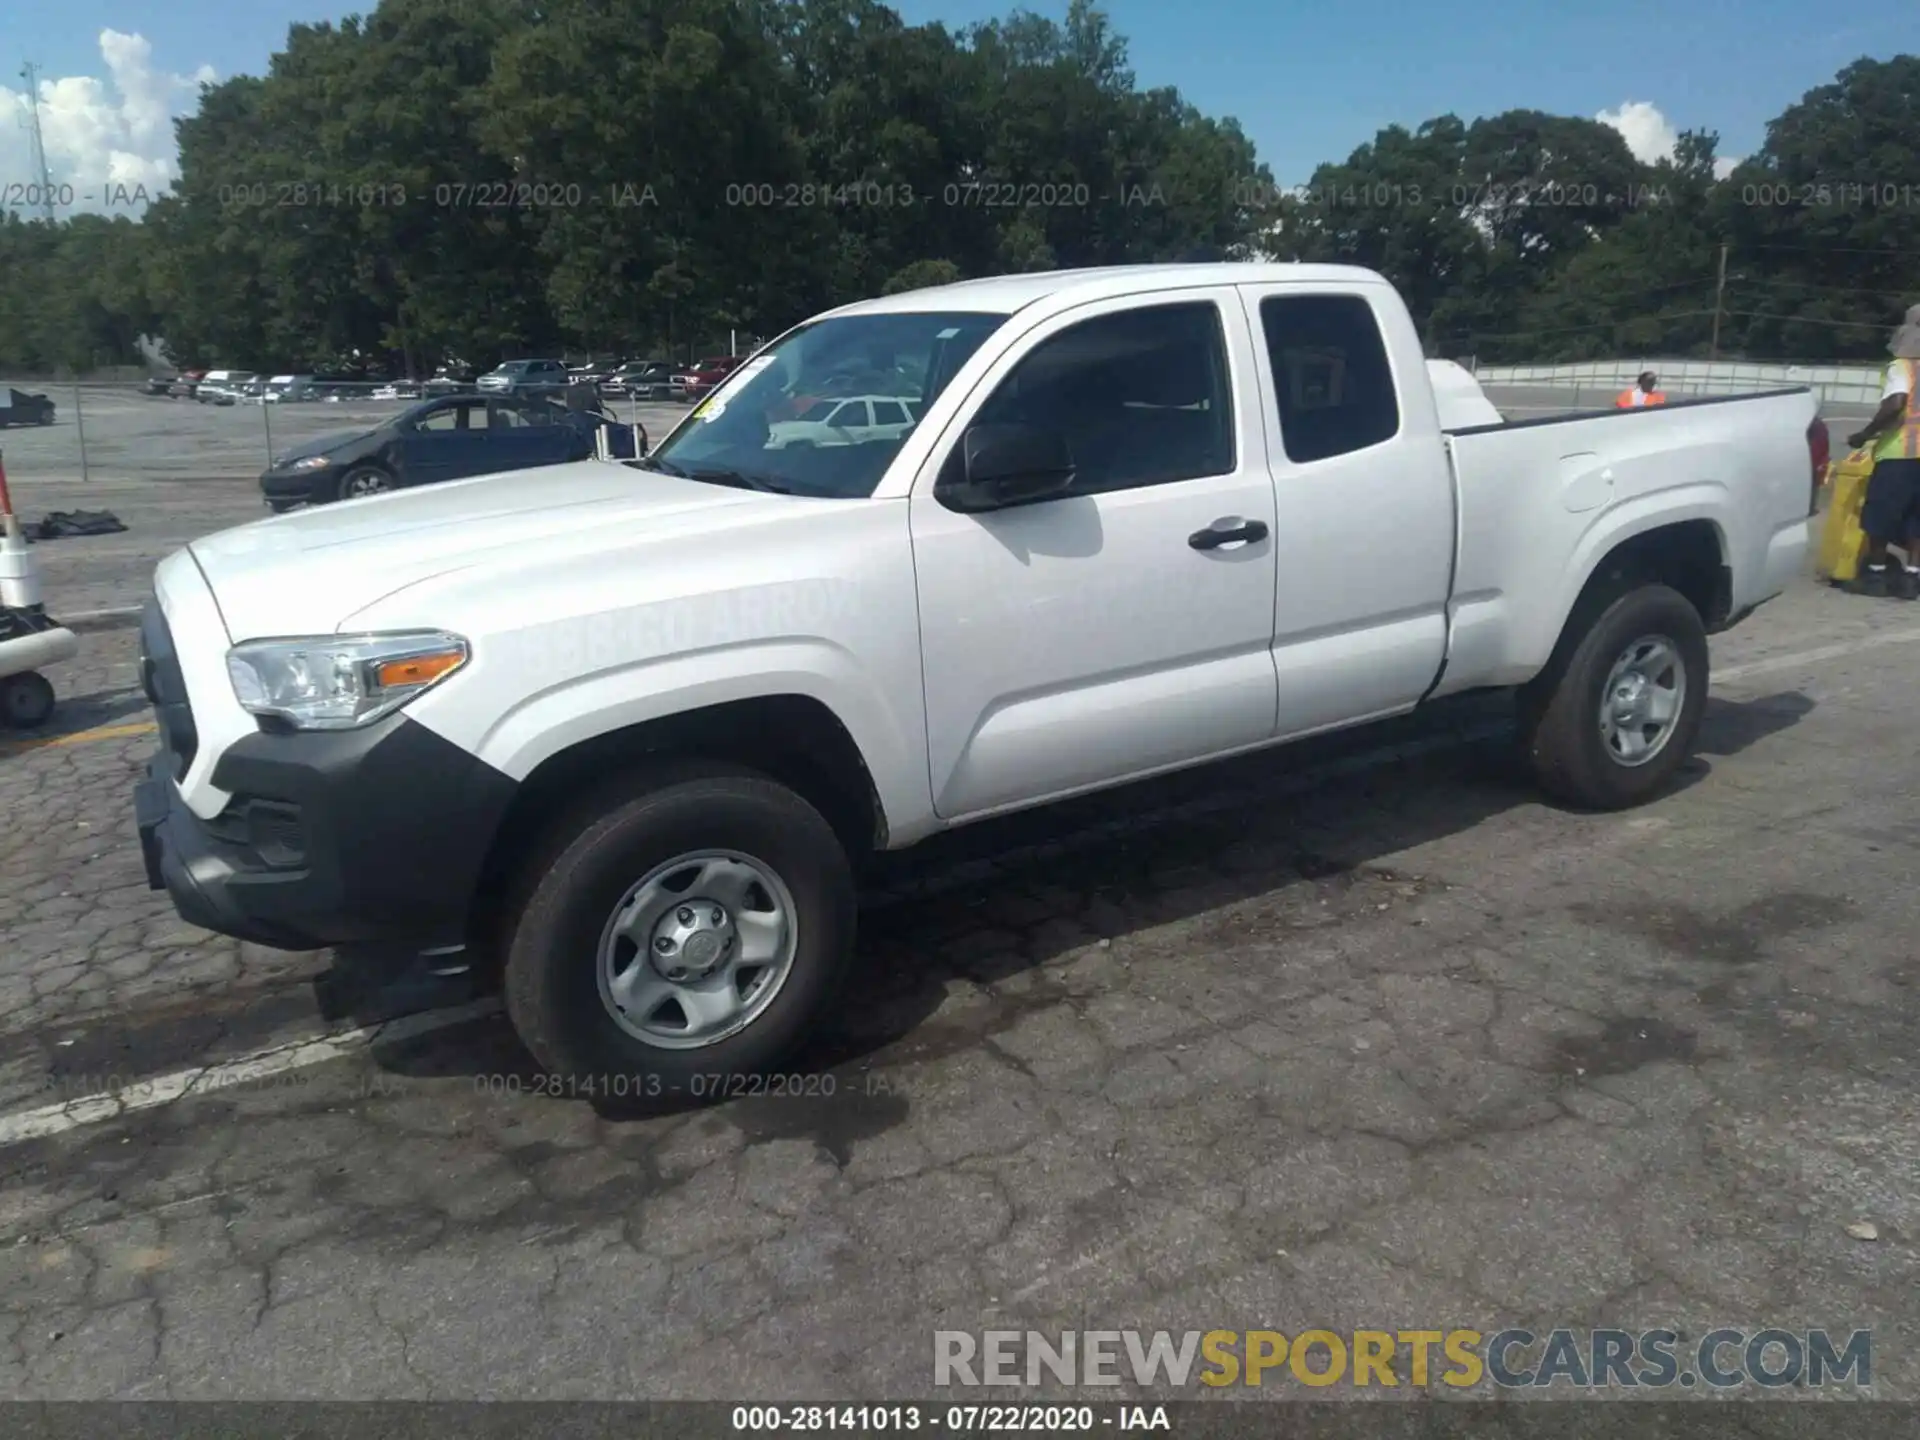 2 Photograph of a damaged car 5TFRX5GN7LX165590 TOYOTA TACOMA 2WD 2020